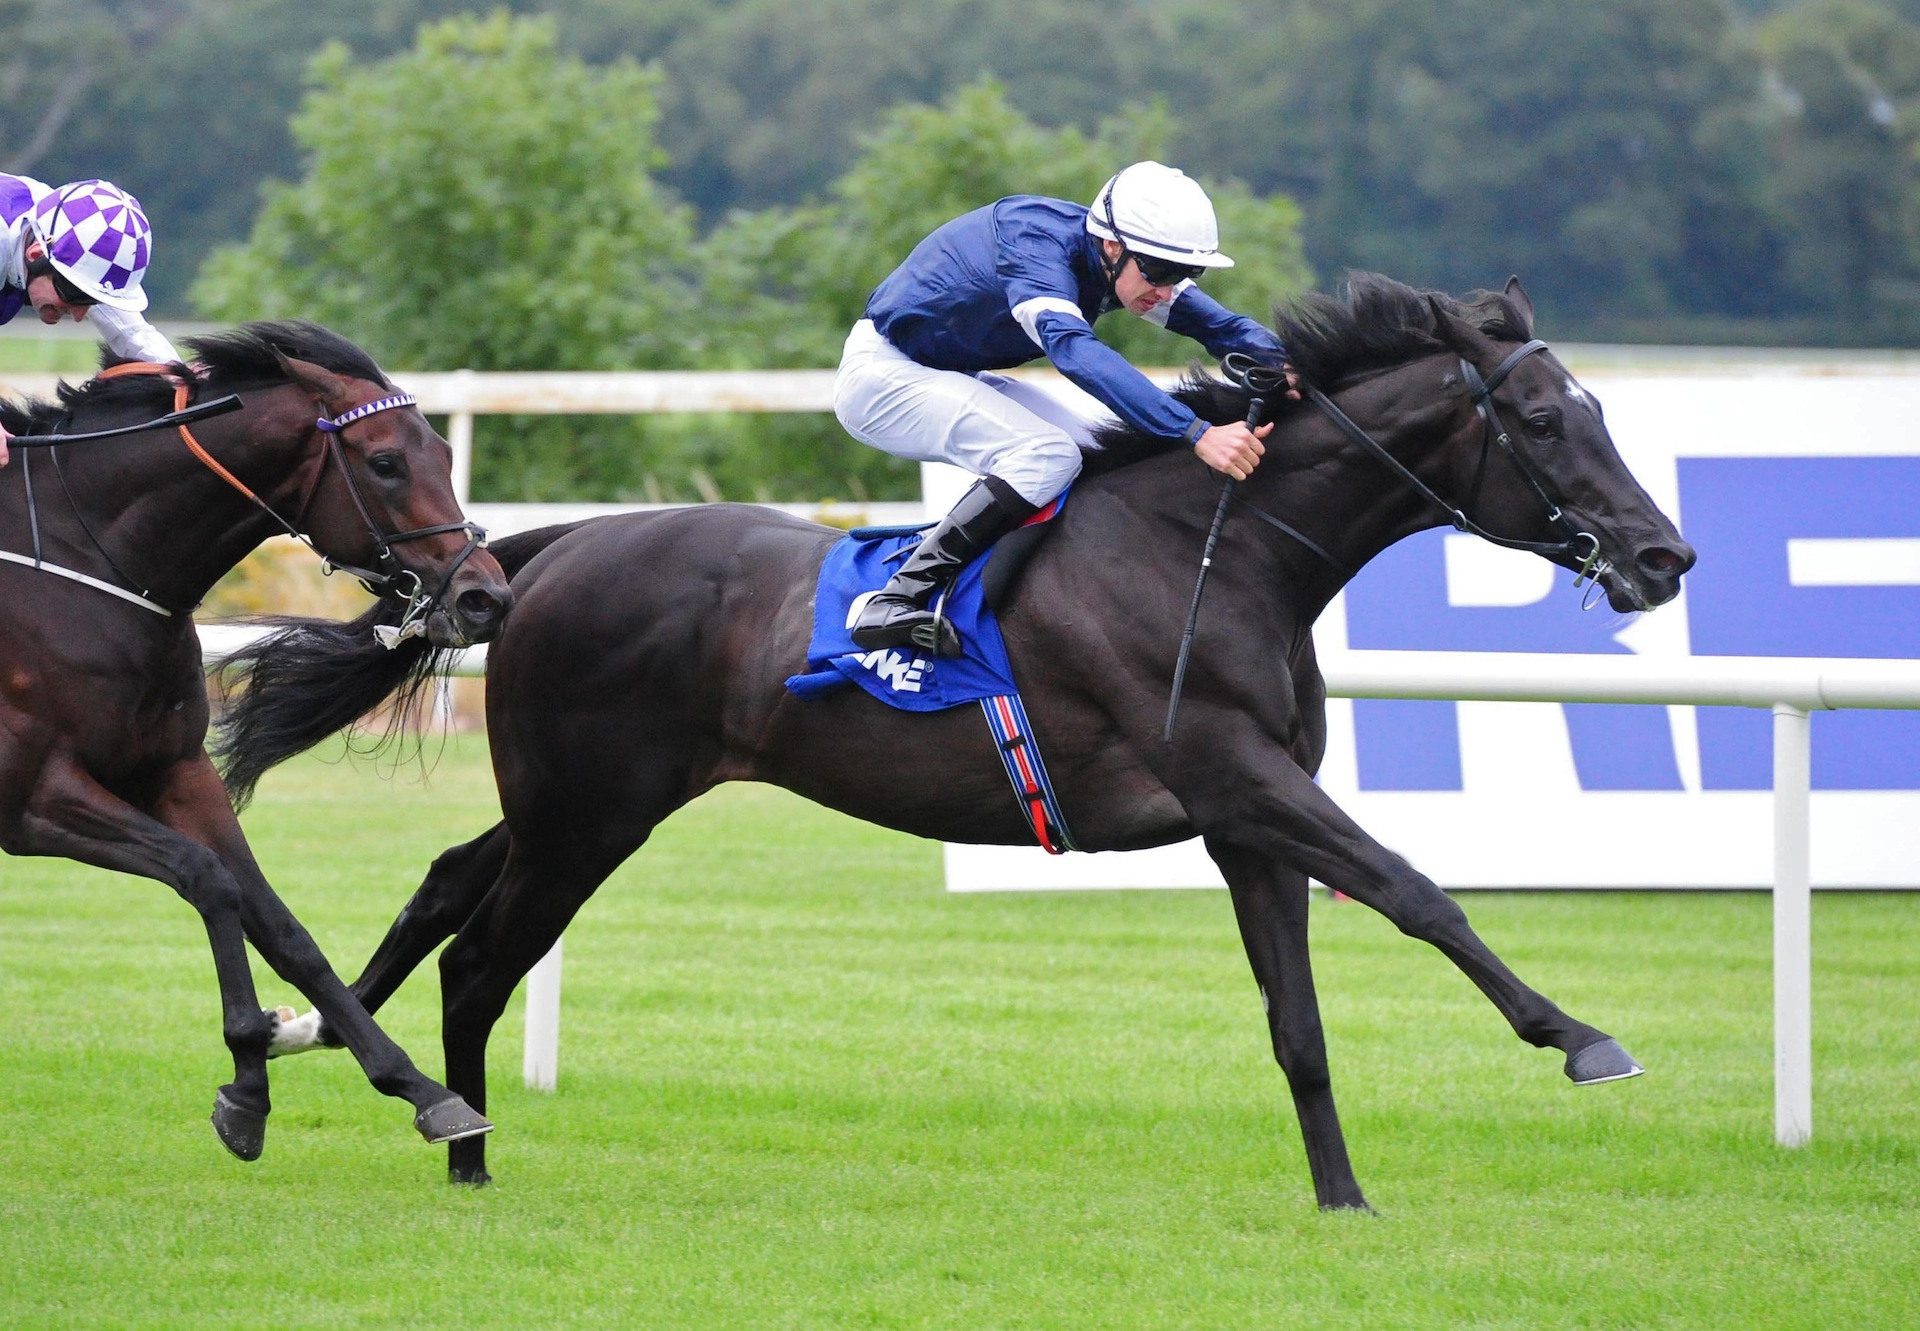 Latrobe (Camelot) winning the Gr.3 Ballyroan Stakes at Leopardstown